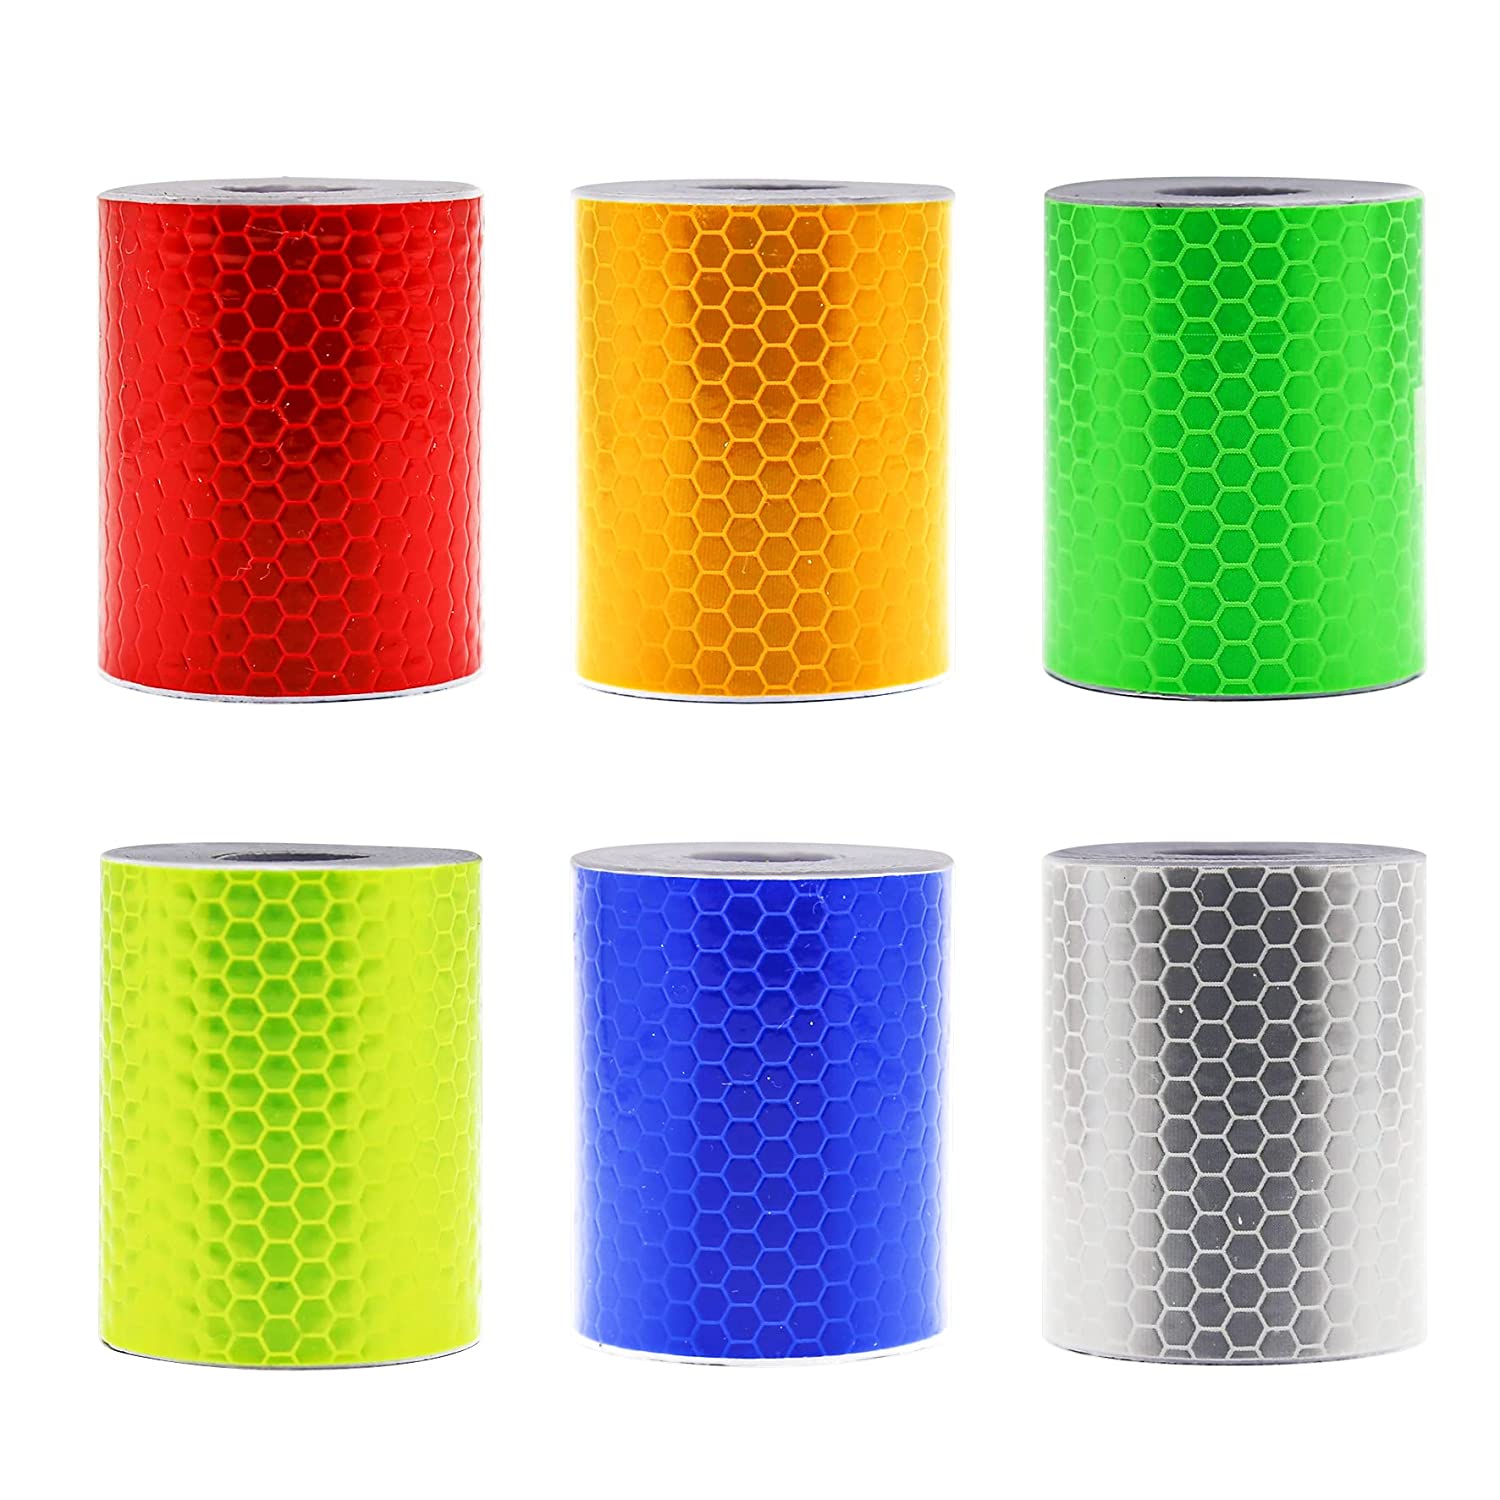 Reflective Warning Tapes Waterproof Durable Night Safety Conspicuity Reflector Stickers